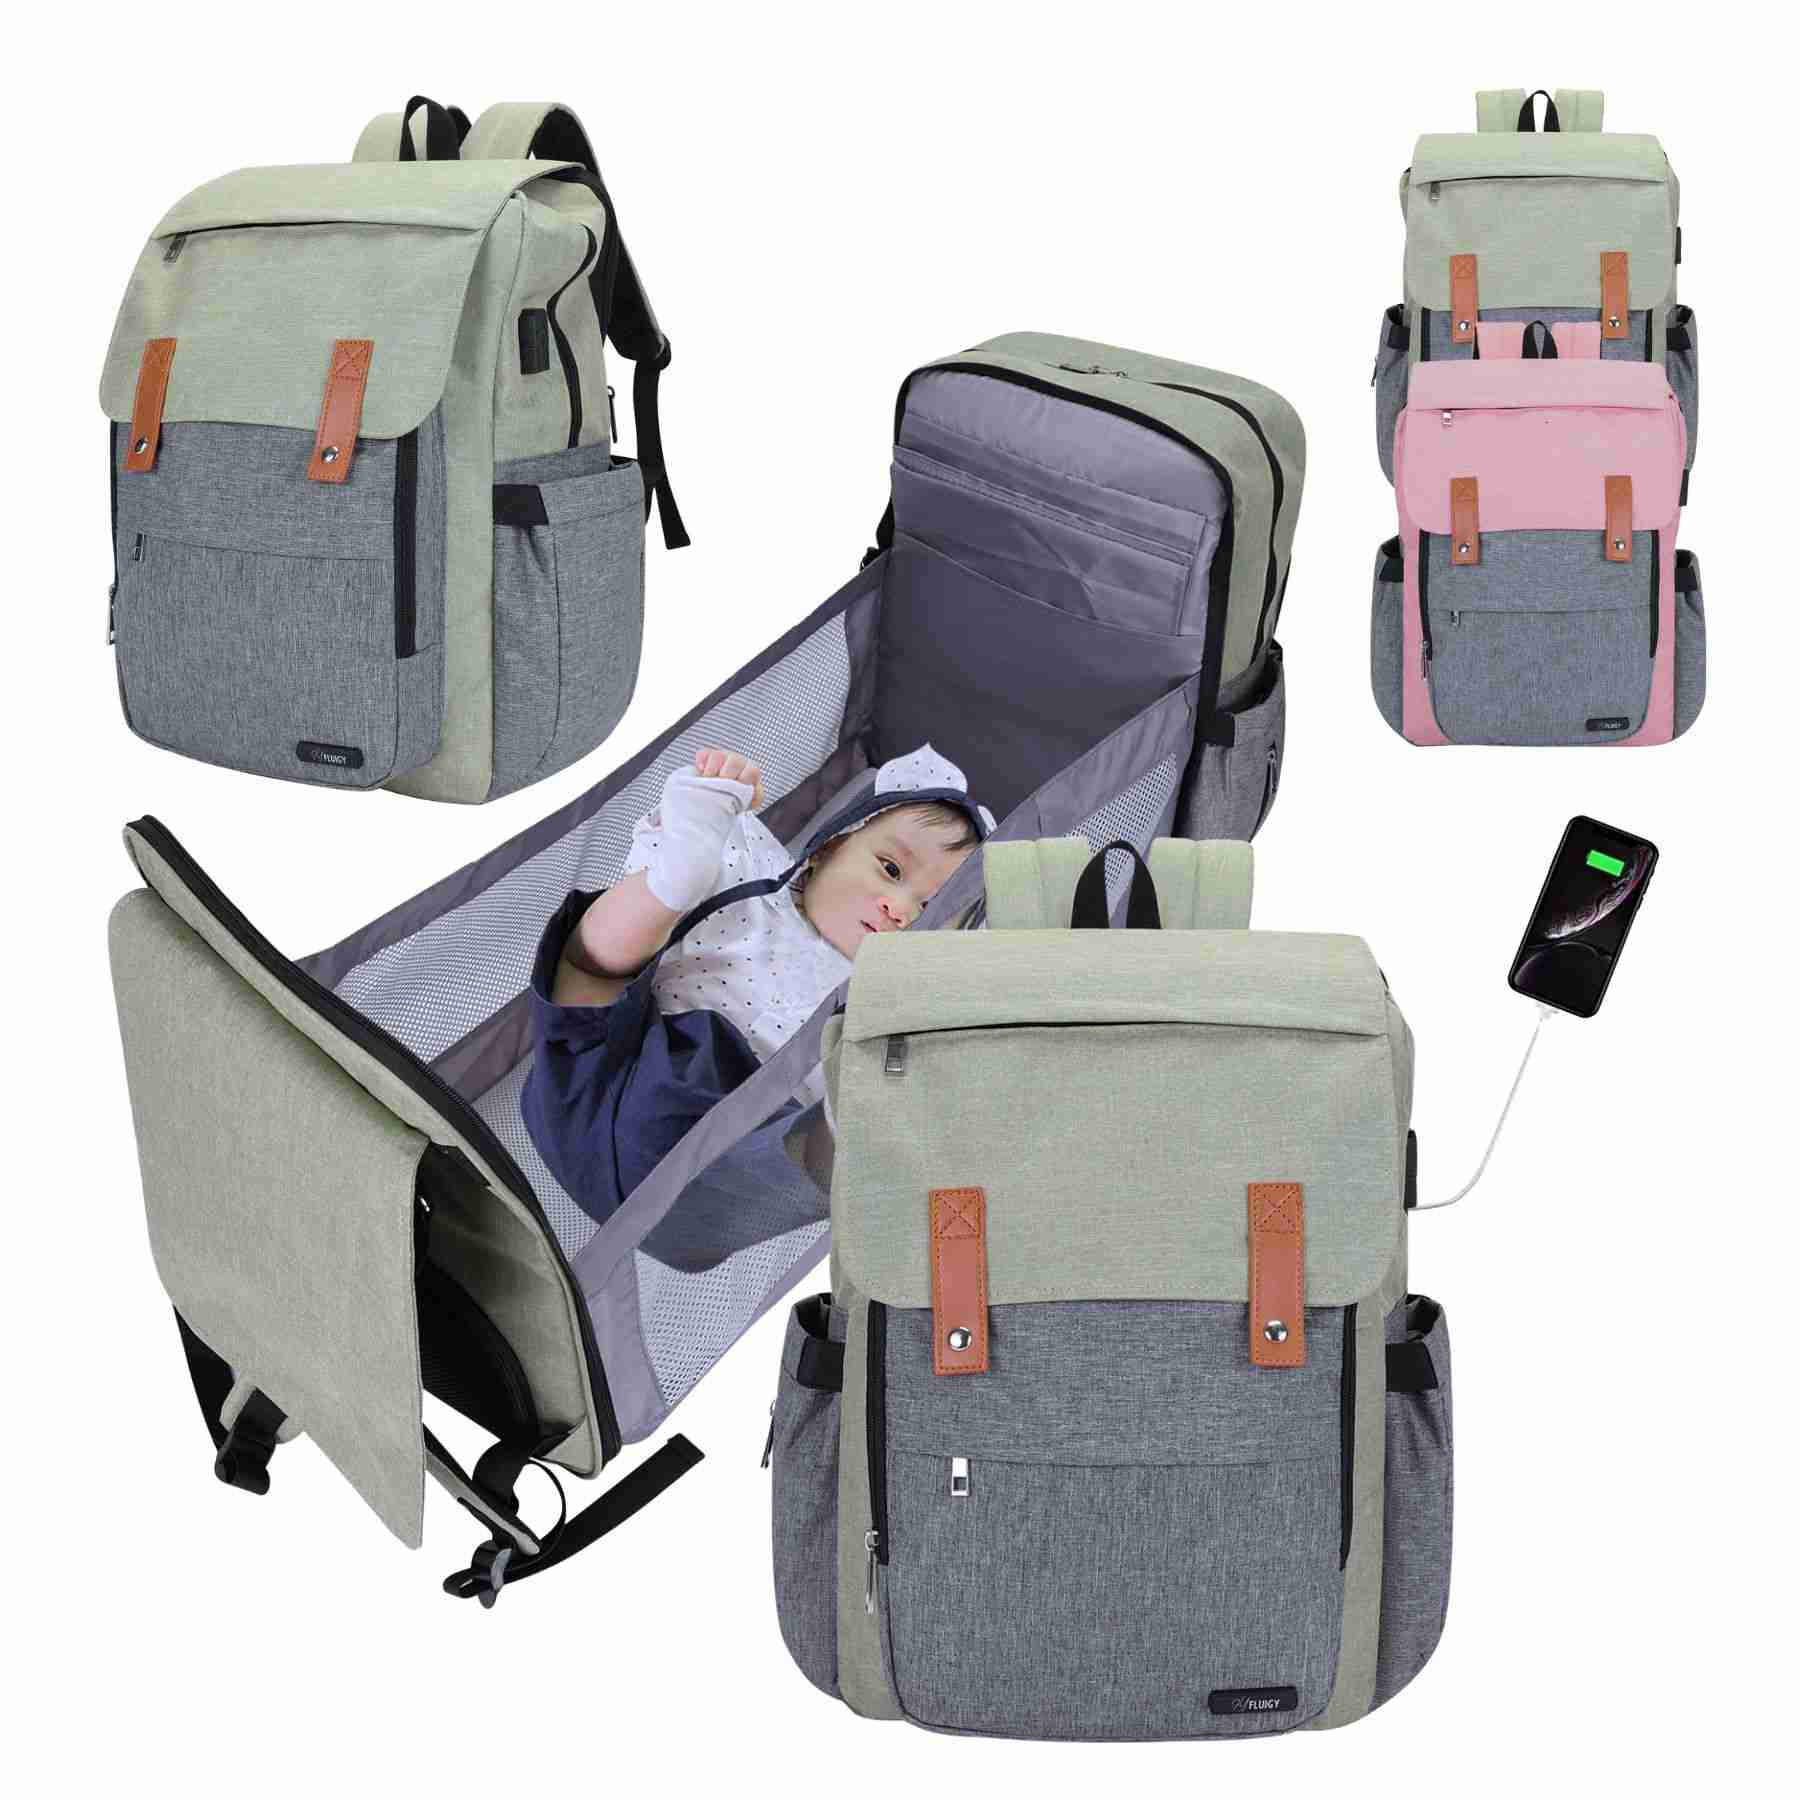 diaper-bag-backpack-baby-shower-gift-toy with cash back rebate